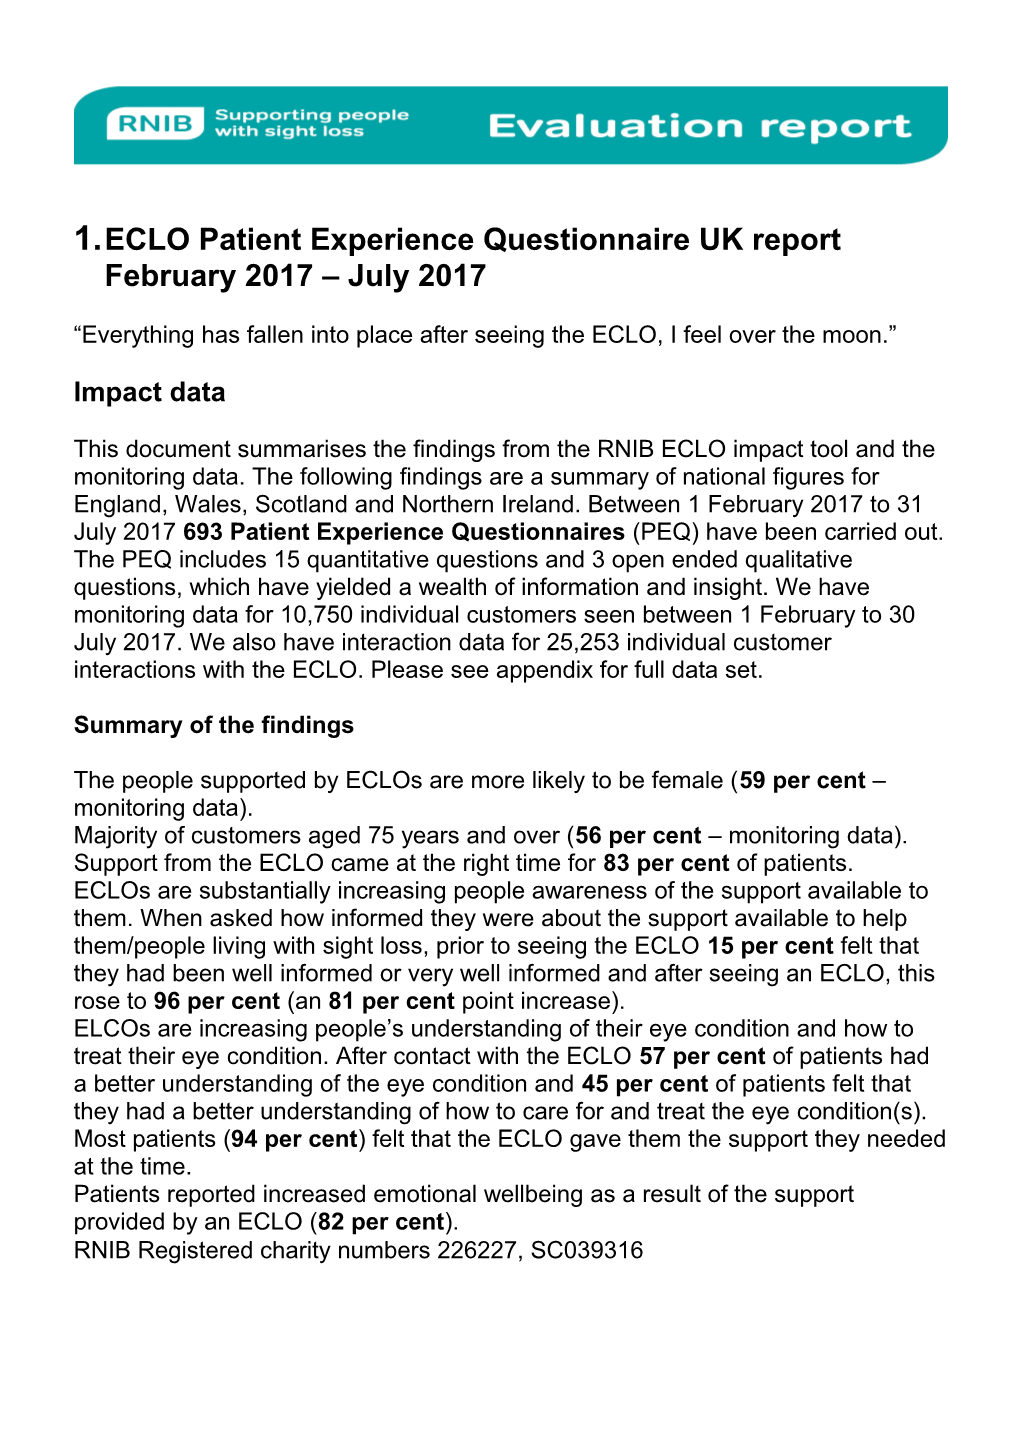 ECLO Patient Experience Questionnaire UK Report February 2017 July 2017